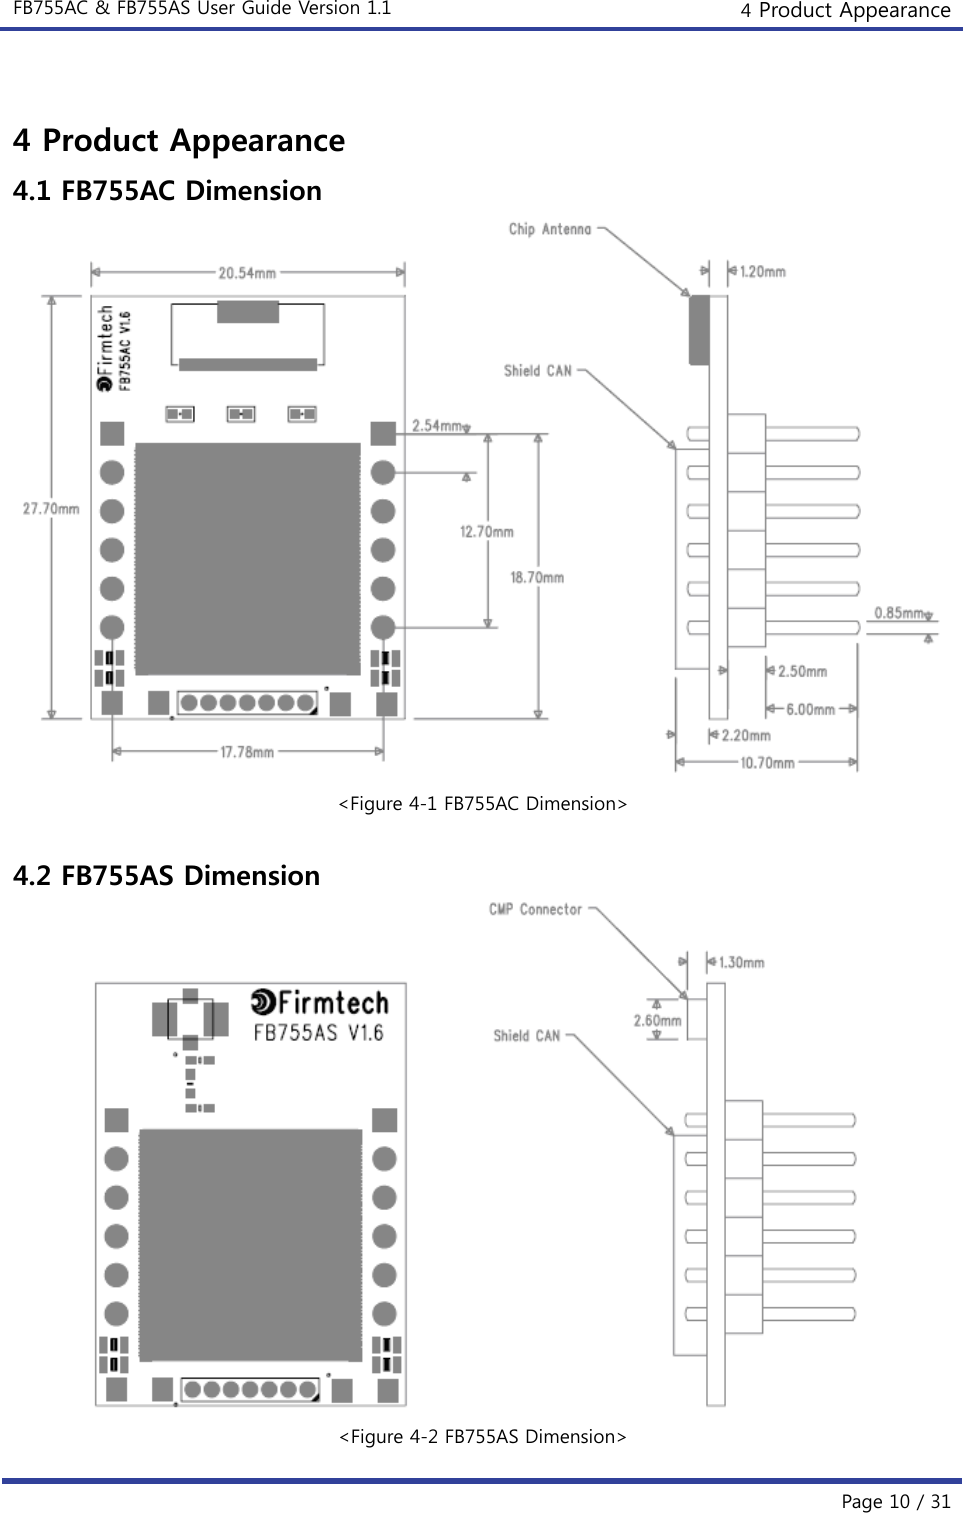 FB755AC &amp; FB755AS User Guide Version 1.1  4 Product Appearance  Page 10 / 31  4 Product Appearance 4.1 FB755AC Dimension  &lt;Figure 4-1 FB755AC Dimension&gt;  4.2 FB755AS Dimension  &lt;Figure 4-2 FB755AS Dimension&gt; 